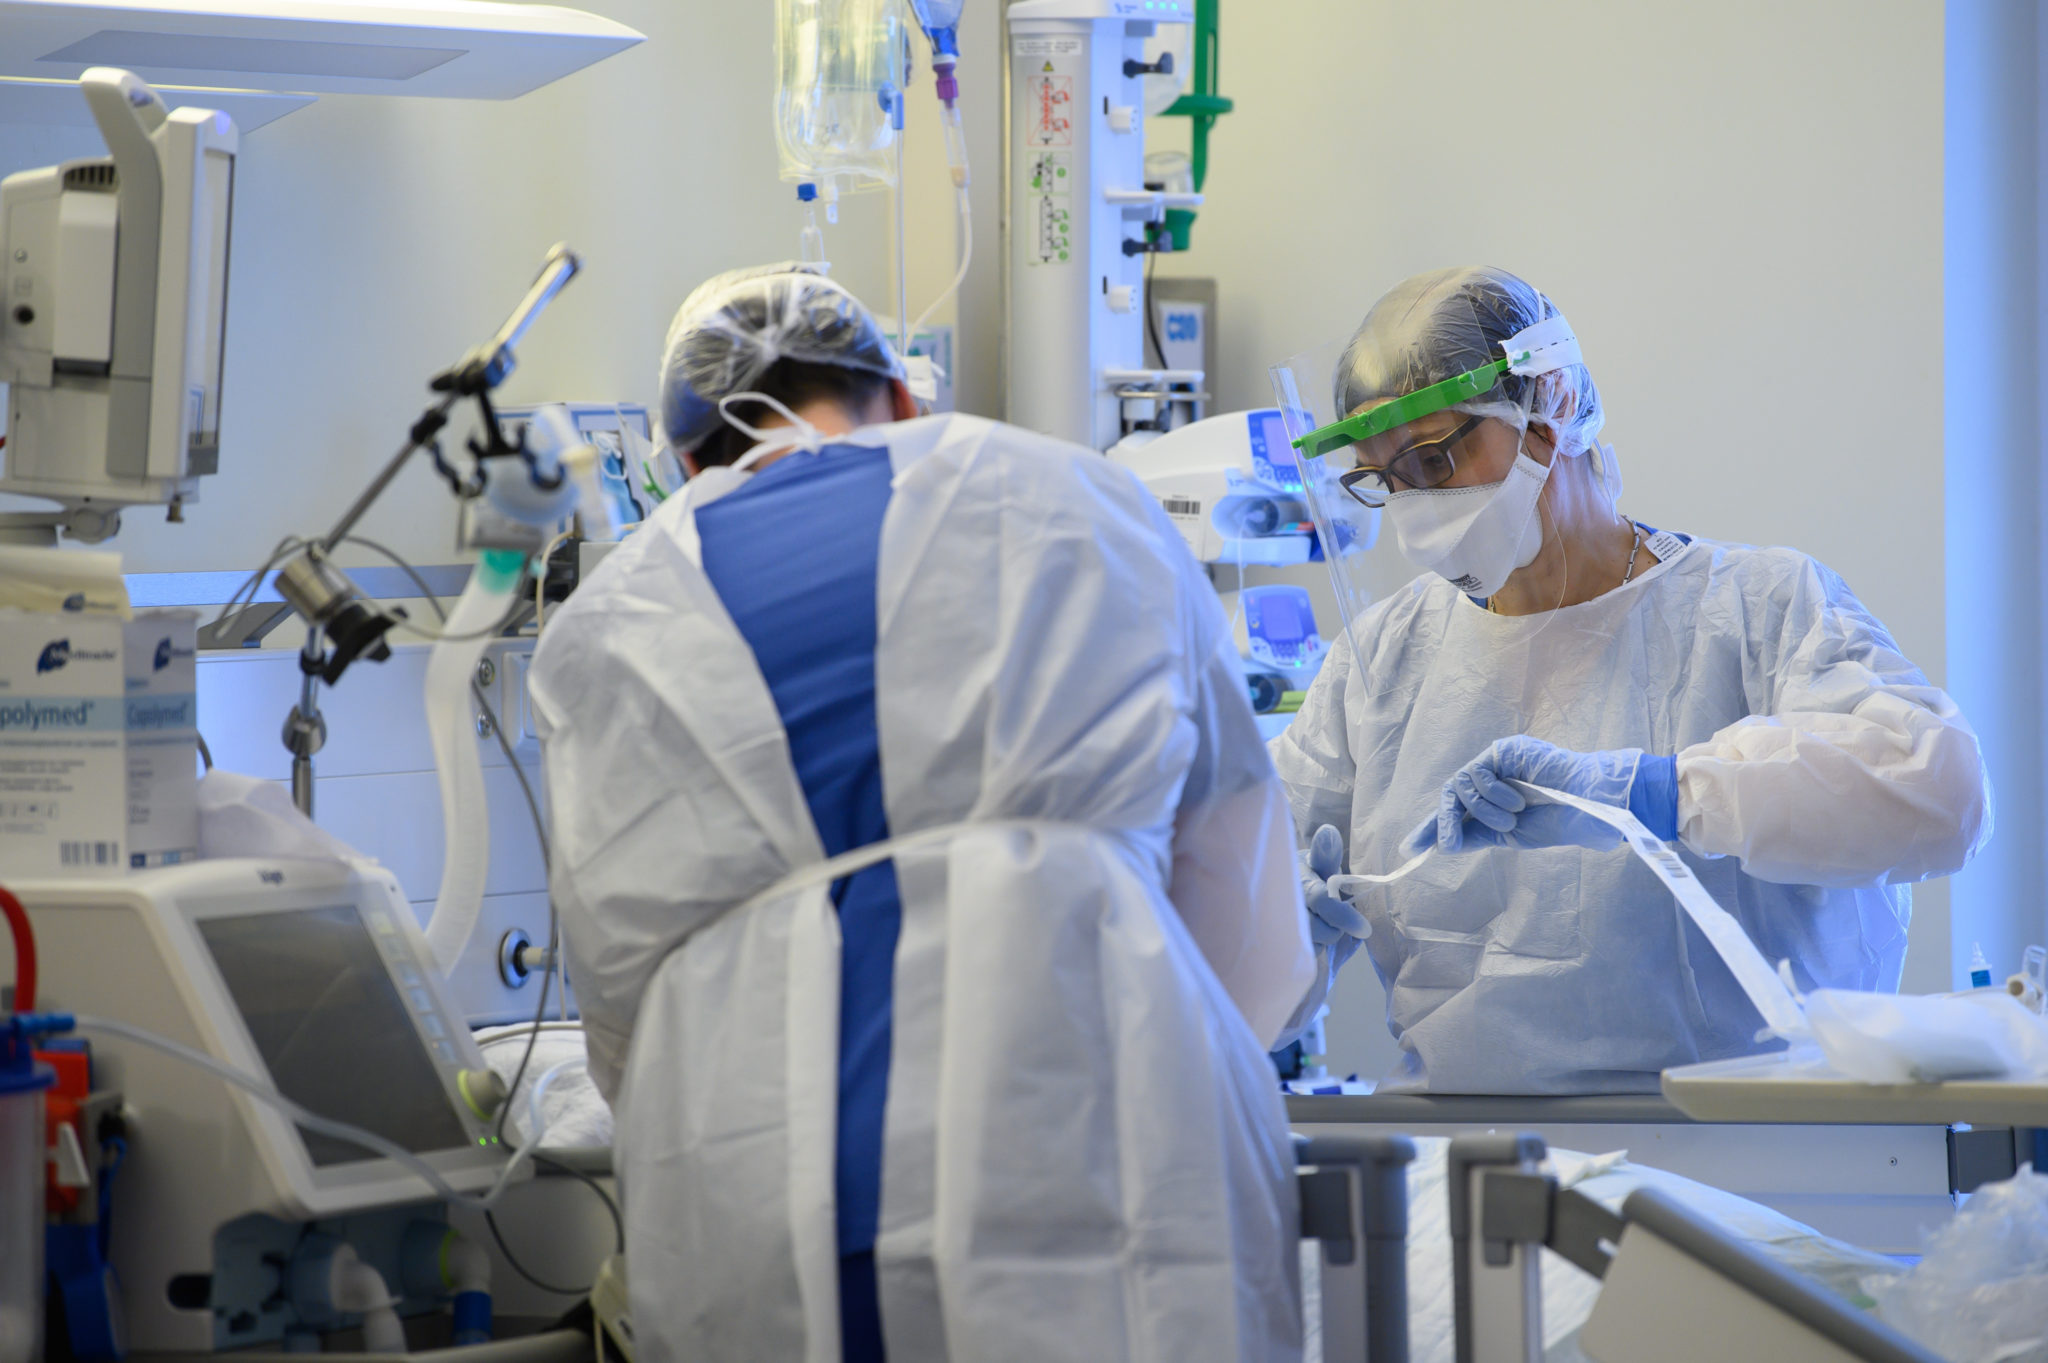 Intensive care nurses are caring for COVID-19 patients